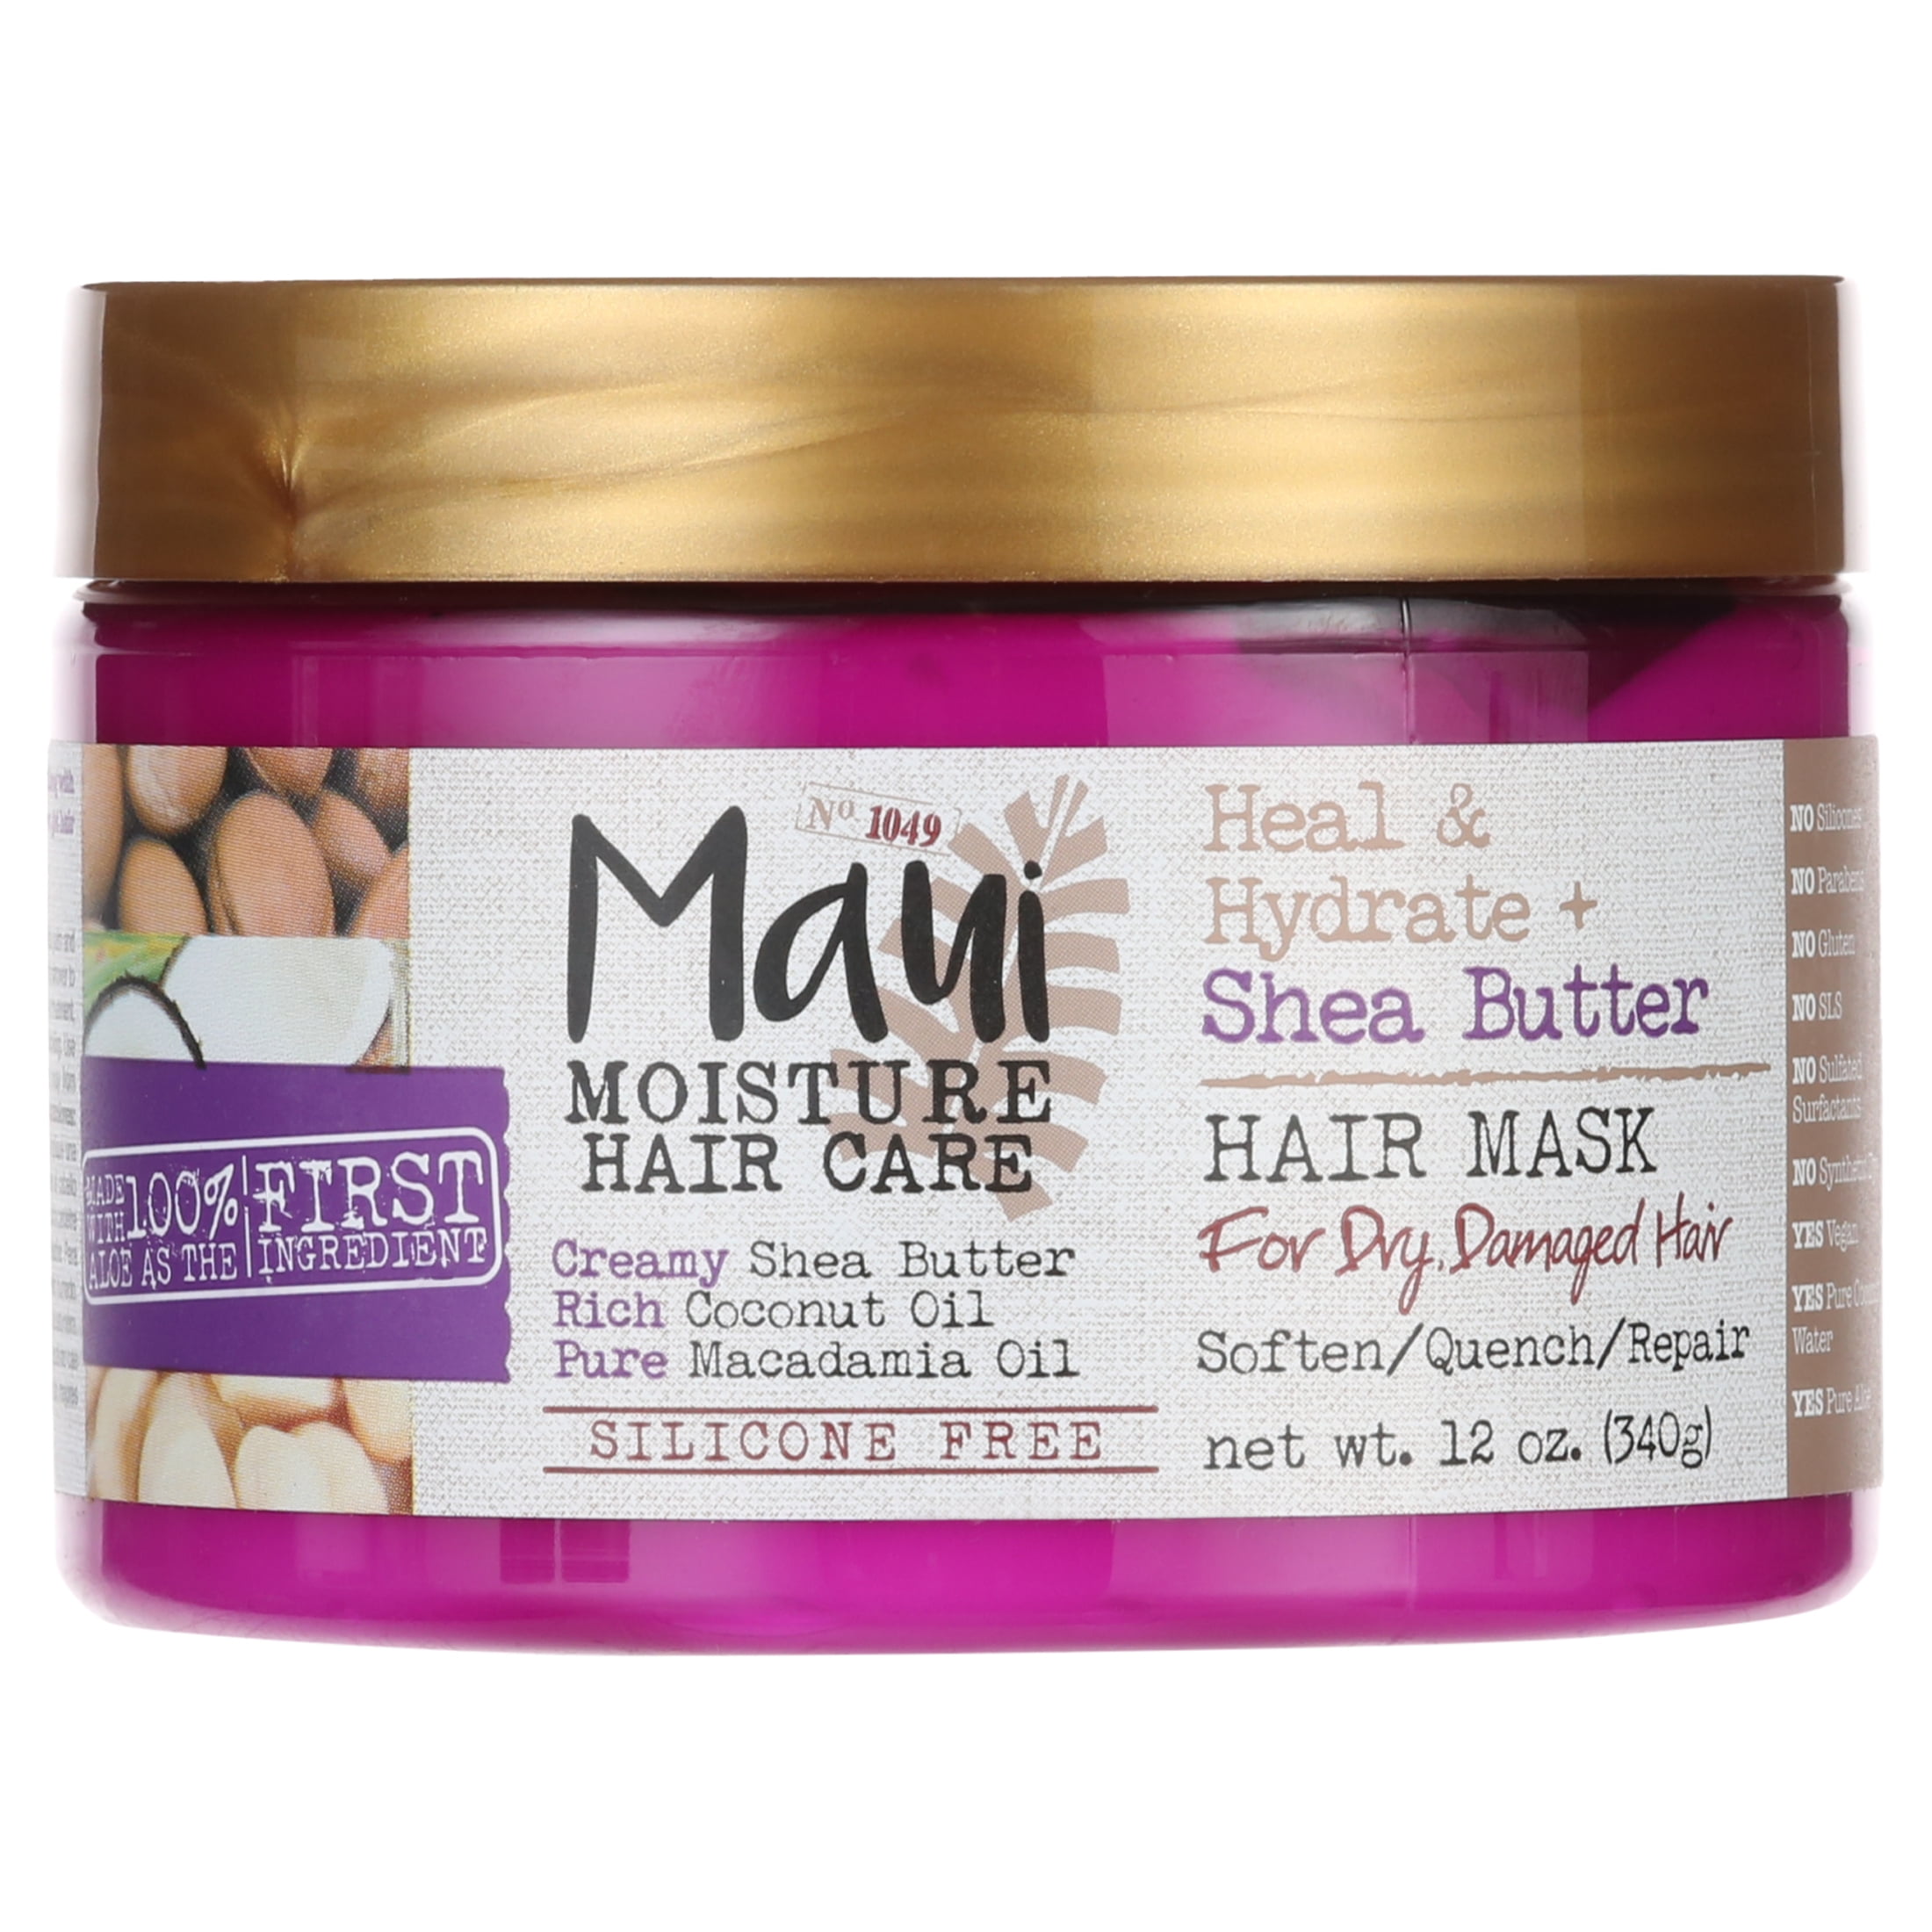 Maui Moisture Heal & Hydrate + Shea Butter Hair Mask & Leave-In Conditioner  Treatment to Deeply Nourish Curls & Help Repair Split Ends, Vegan,  Silicone-, Paraben- & Sulfate-Free, 12 oz - Walmart.com